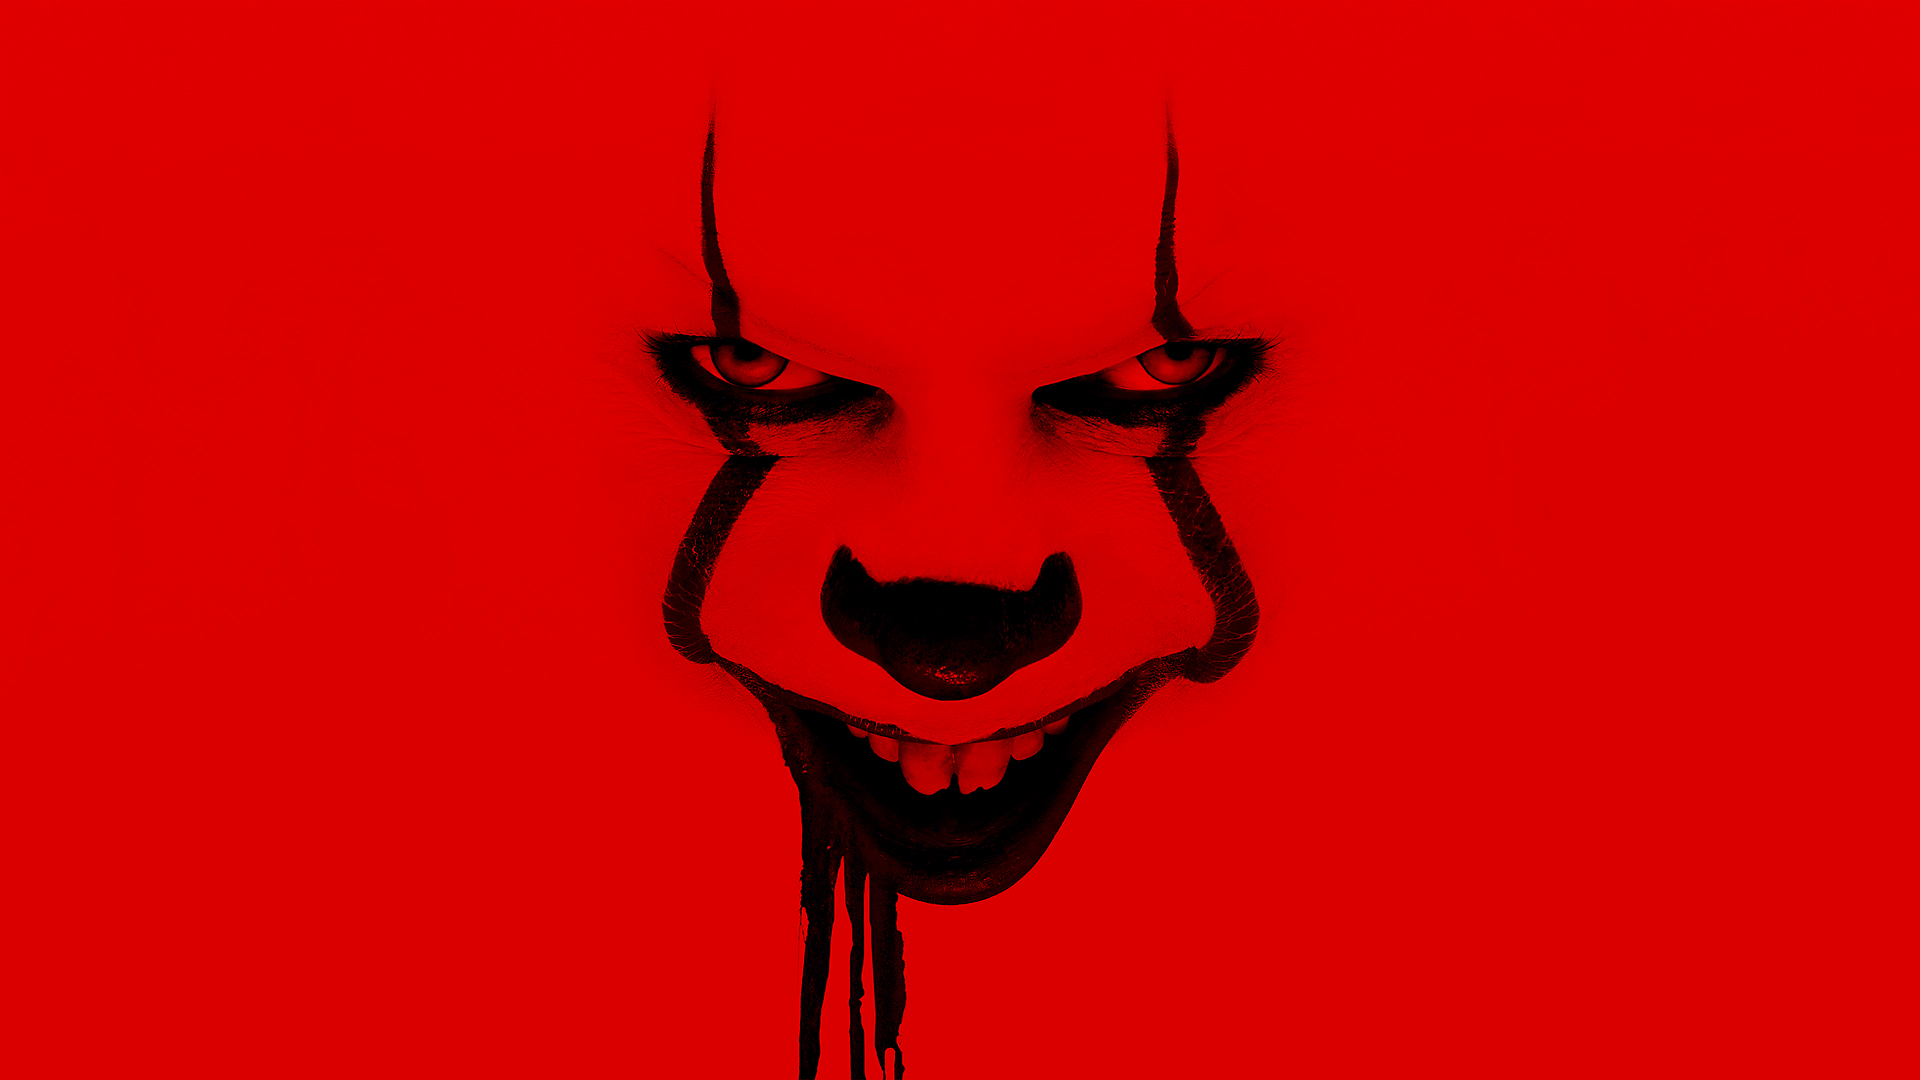 Stephen King's IT Wallpaper: It Chapter Two Wallpaper - Pennywise.